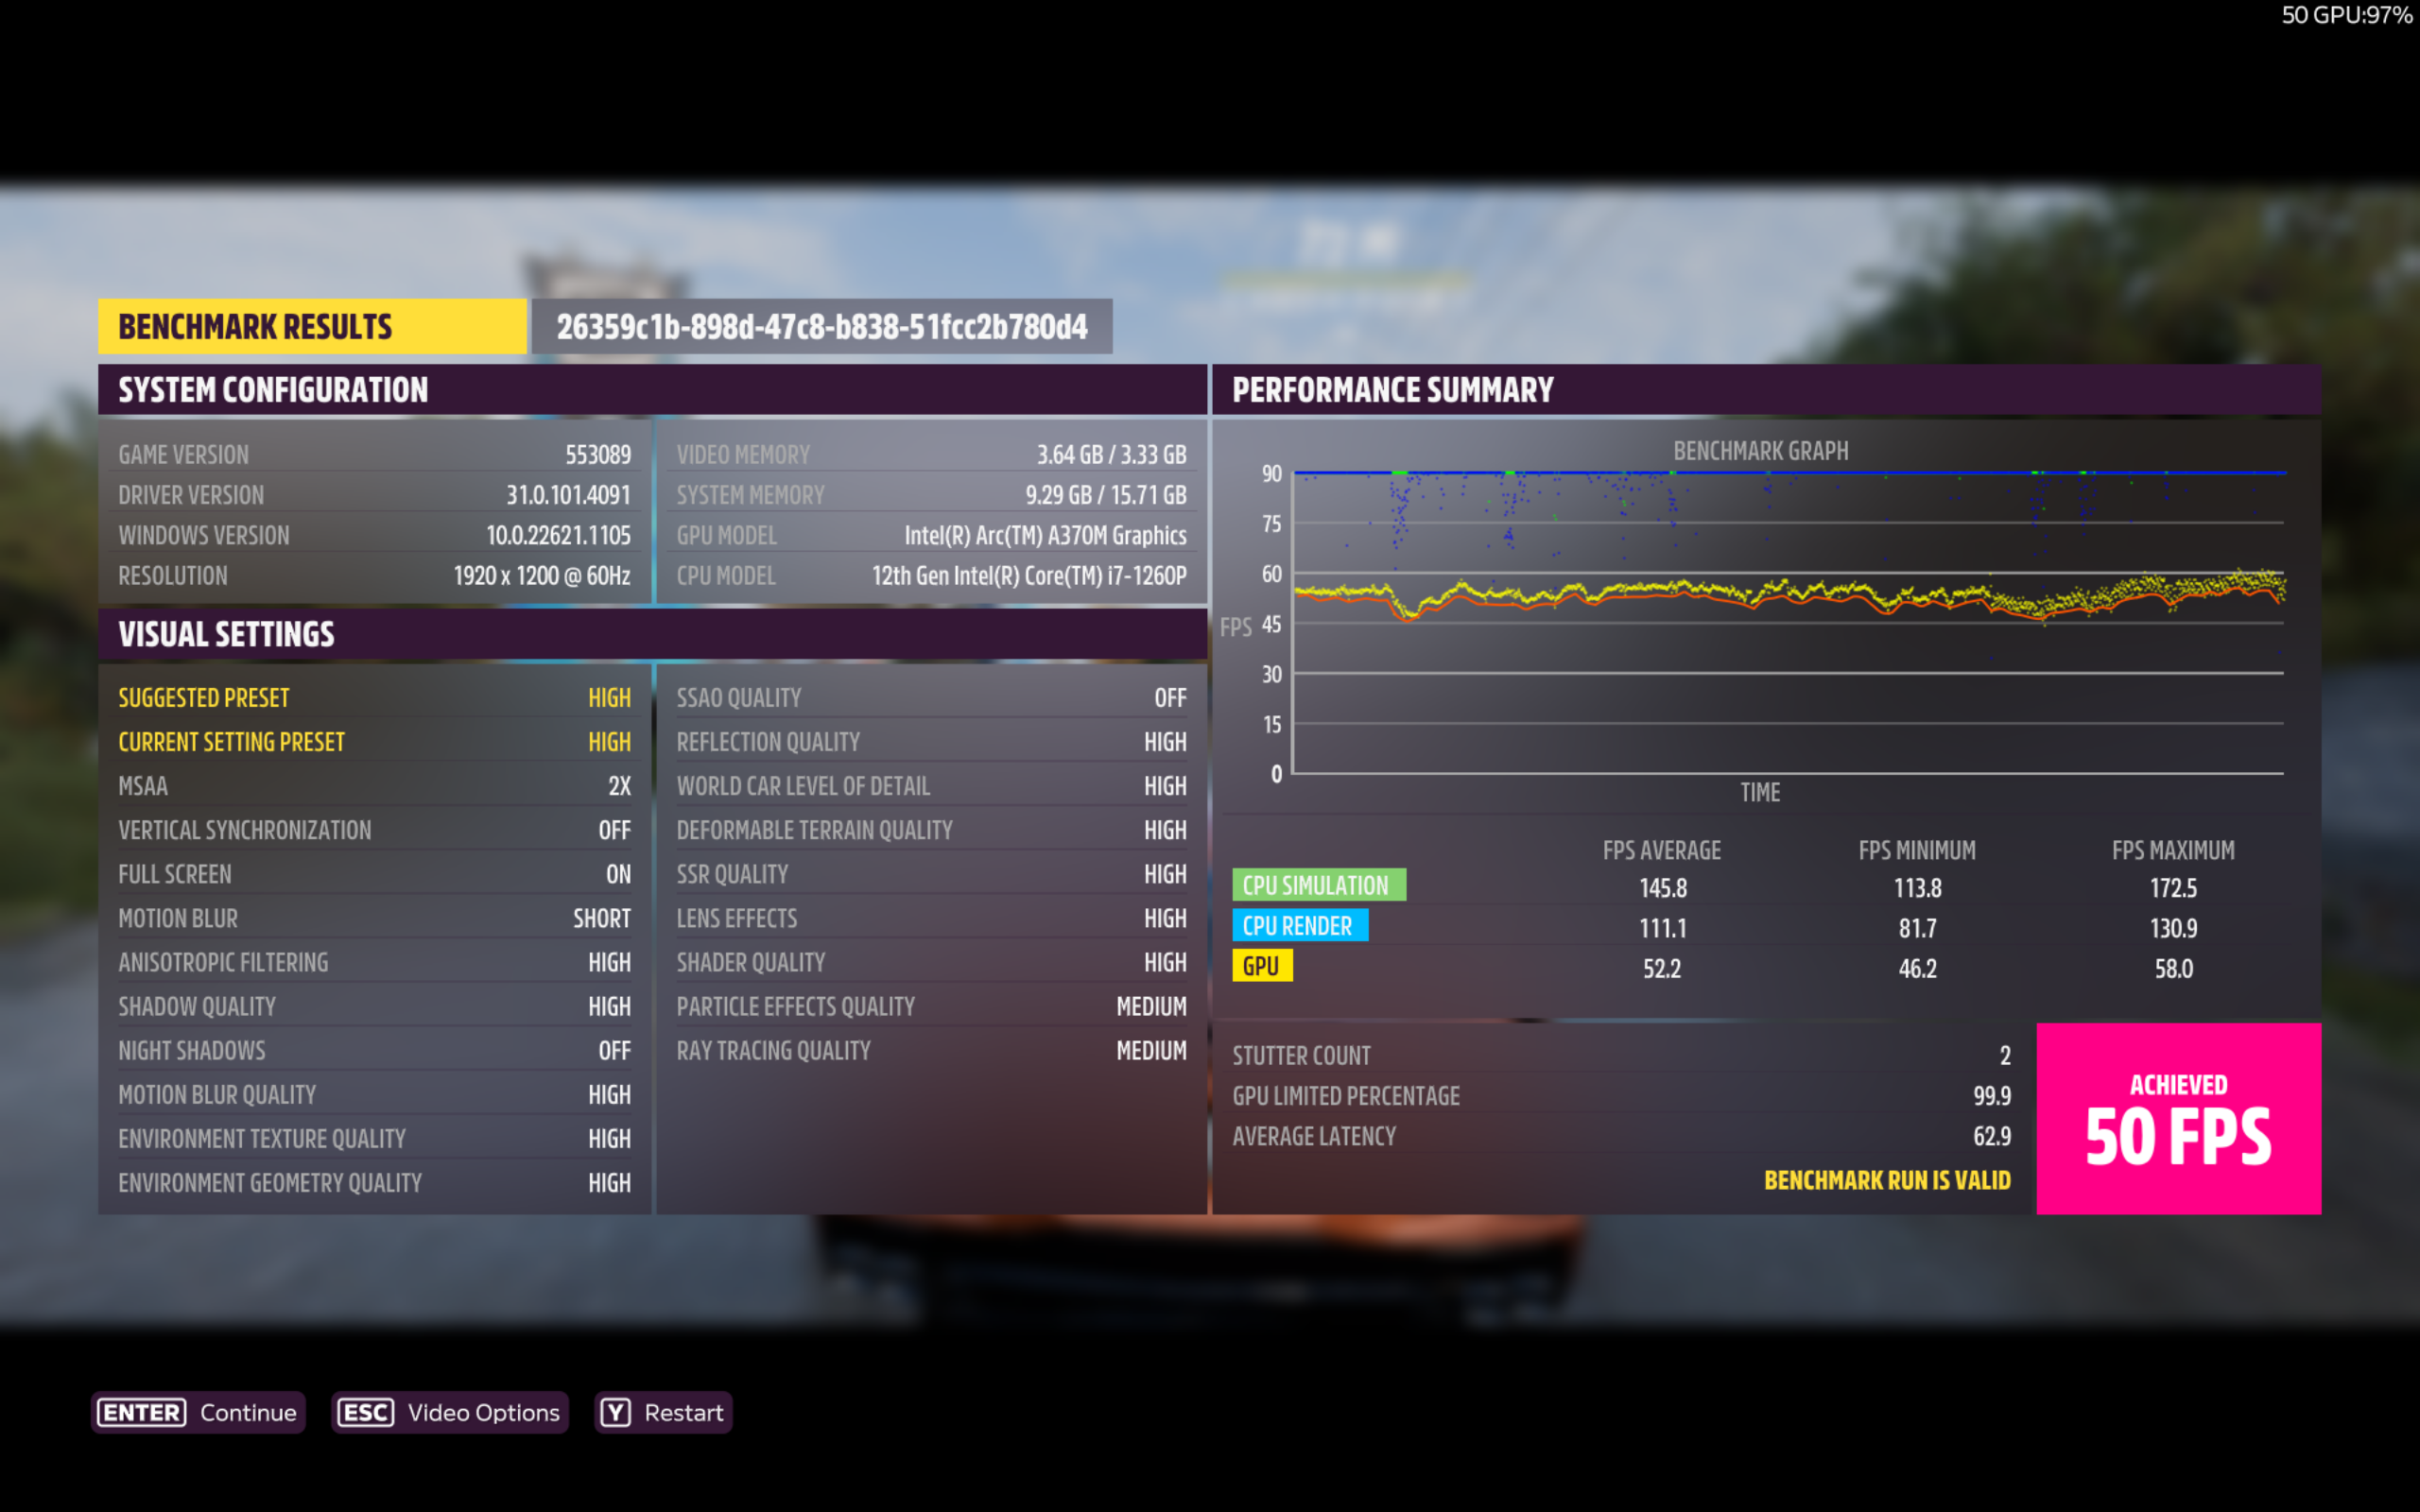 Benchmark results for Forza Horizon 5 running on the Intel Arc A370M